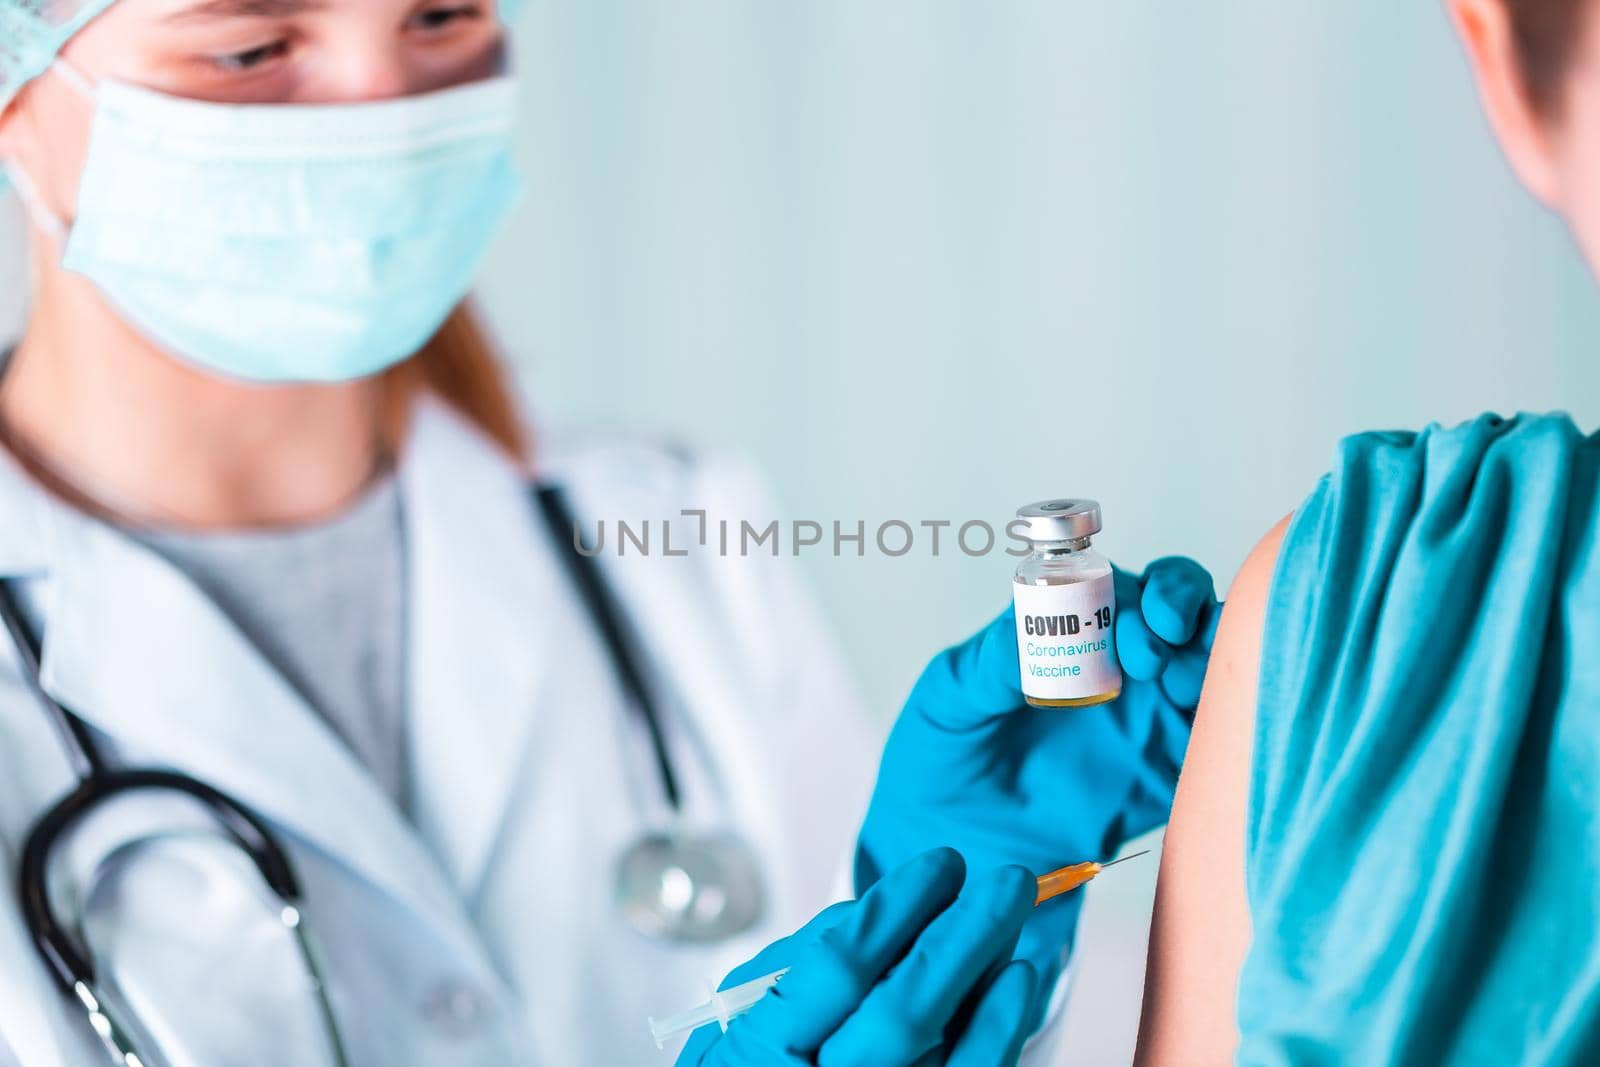 Woman doctor or nurse in uniform and gloves wearing face mask protective in lab, making an injecion holding vaccine bottle with COVID-19 Coronovirus vaccine label